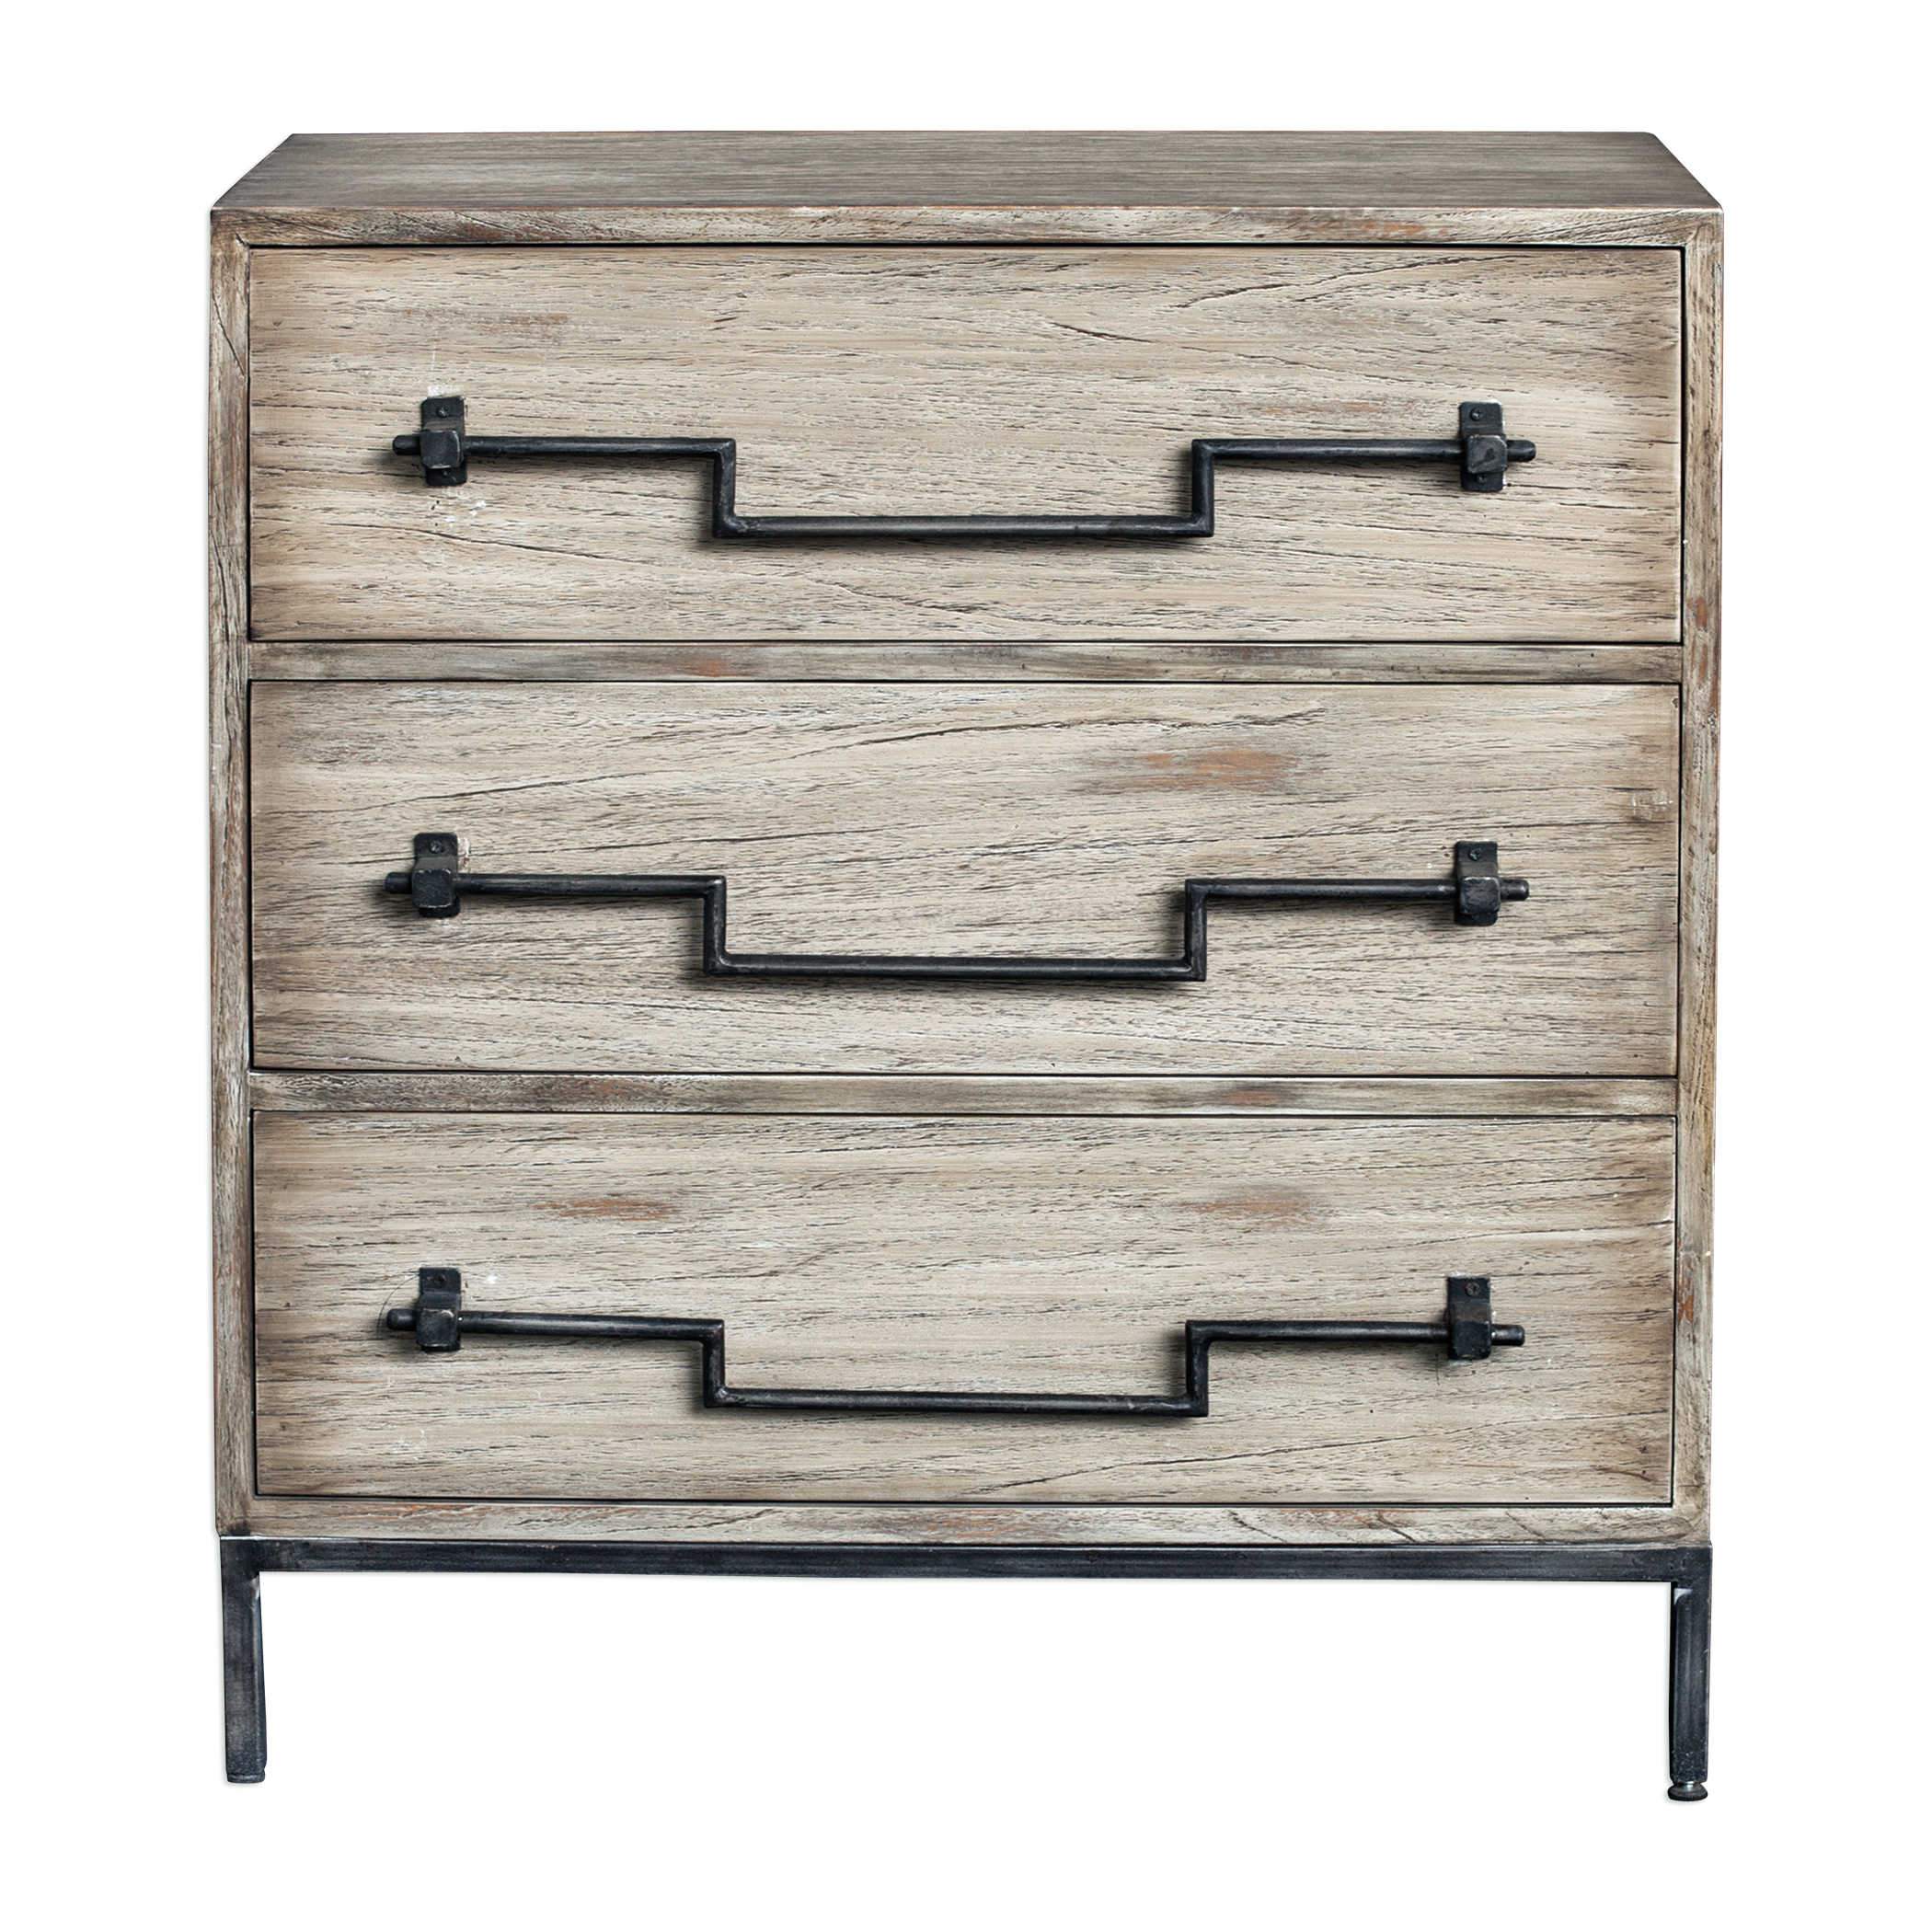 Uttermost Home Motor Freight - Rate to be Quoted Uttermost Jory Accent Chest